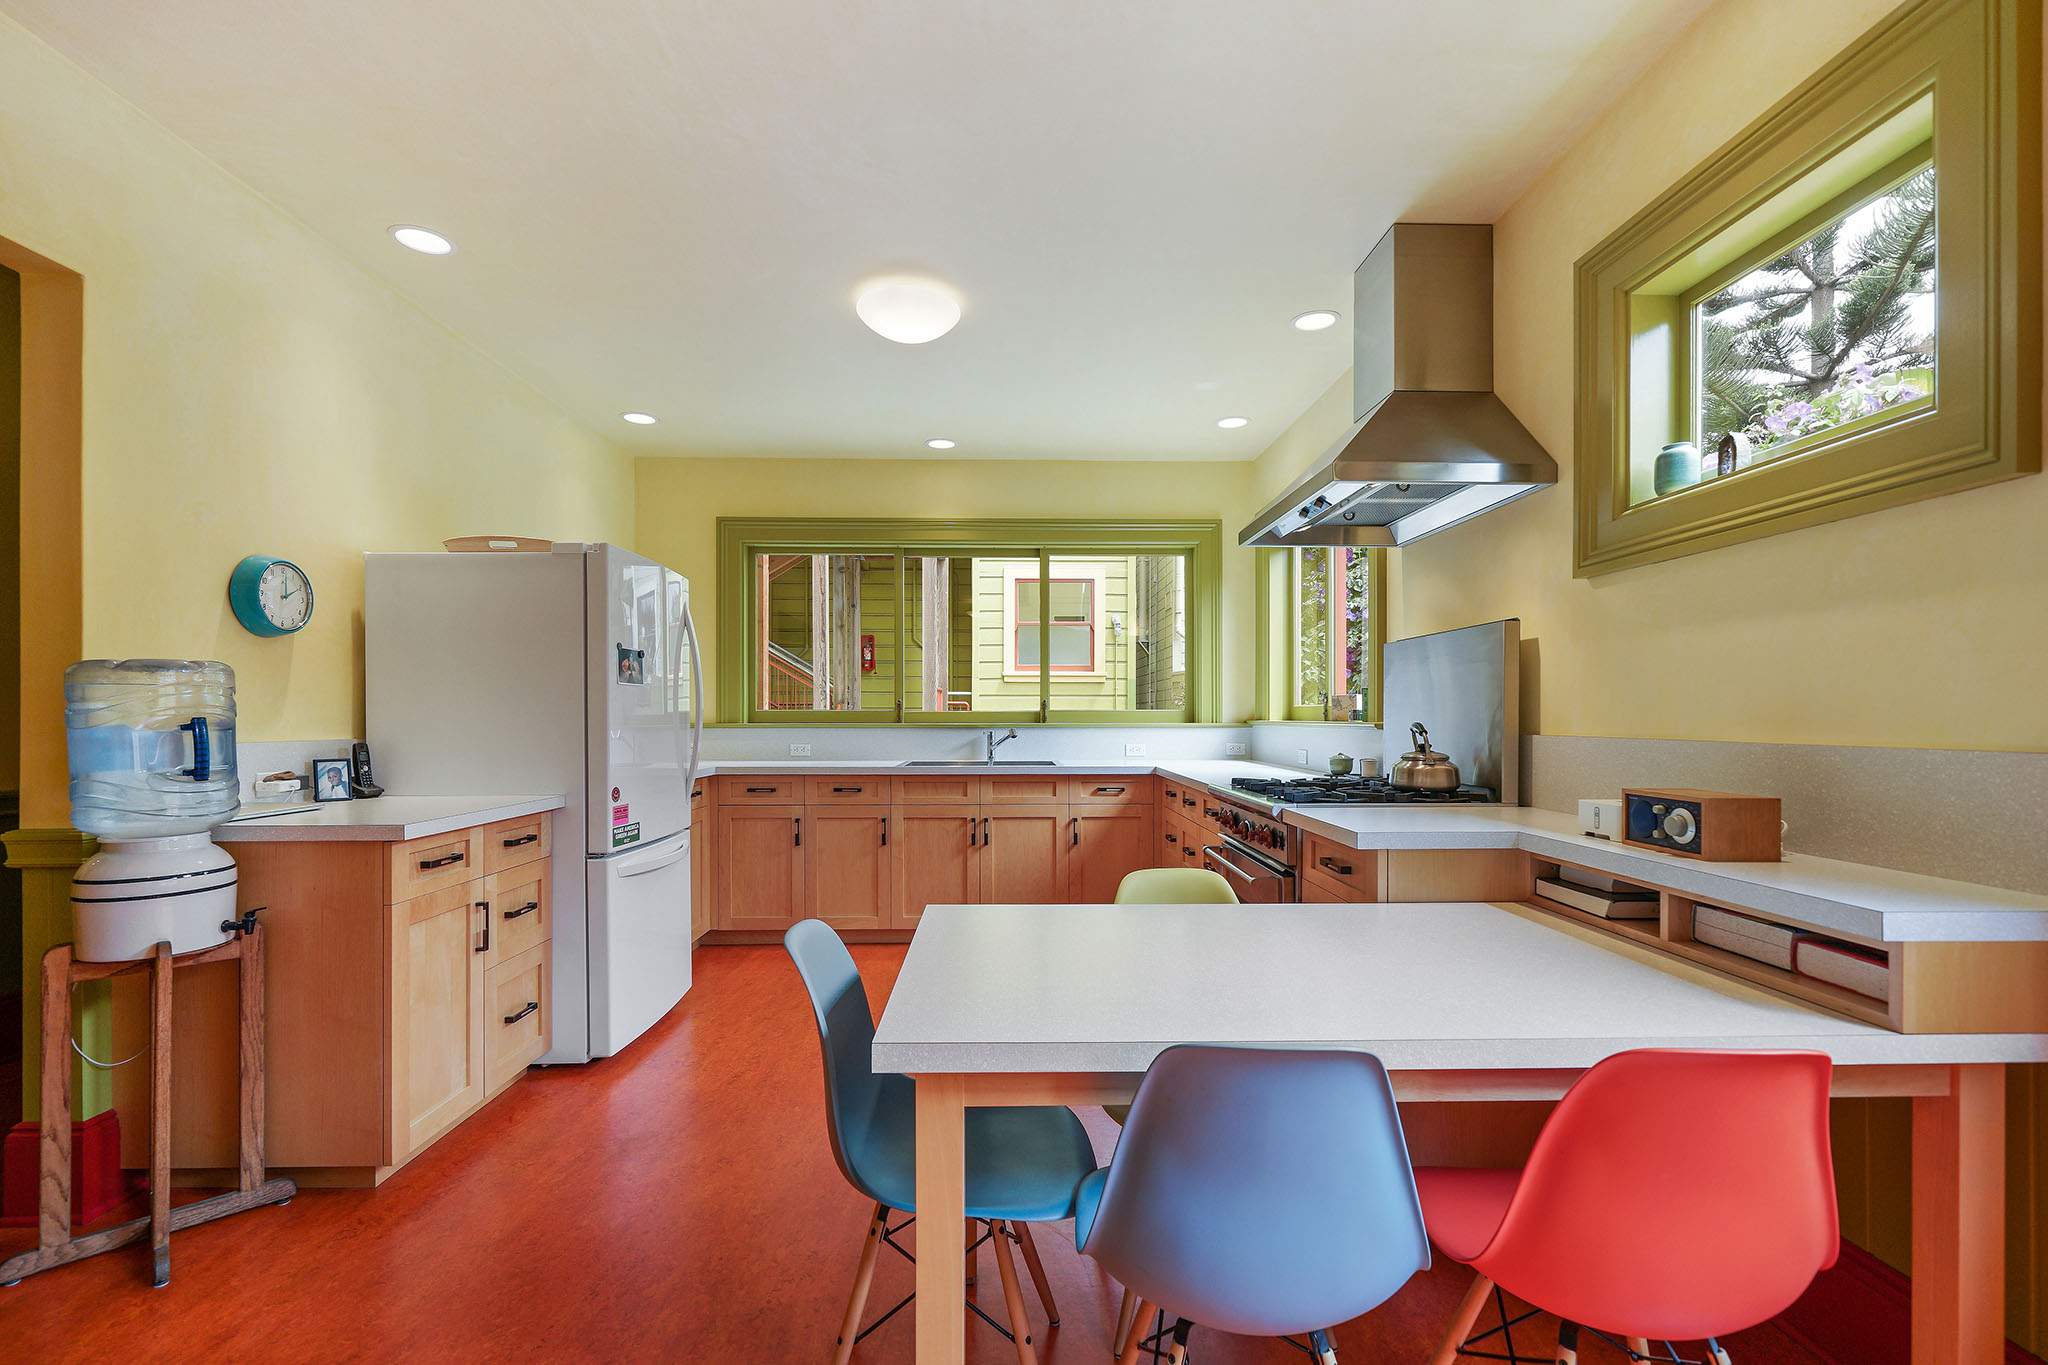 Property Photo: Kitchen, featuring large windows and wood cabinets